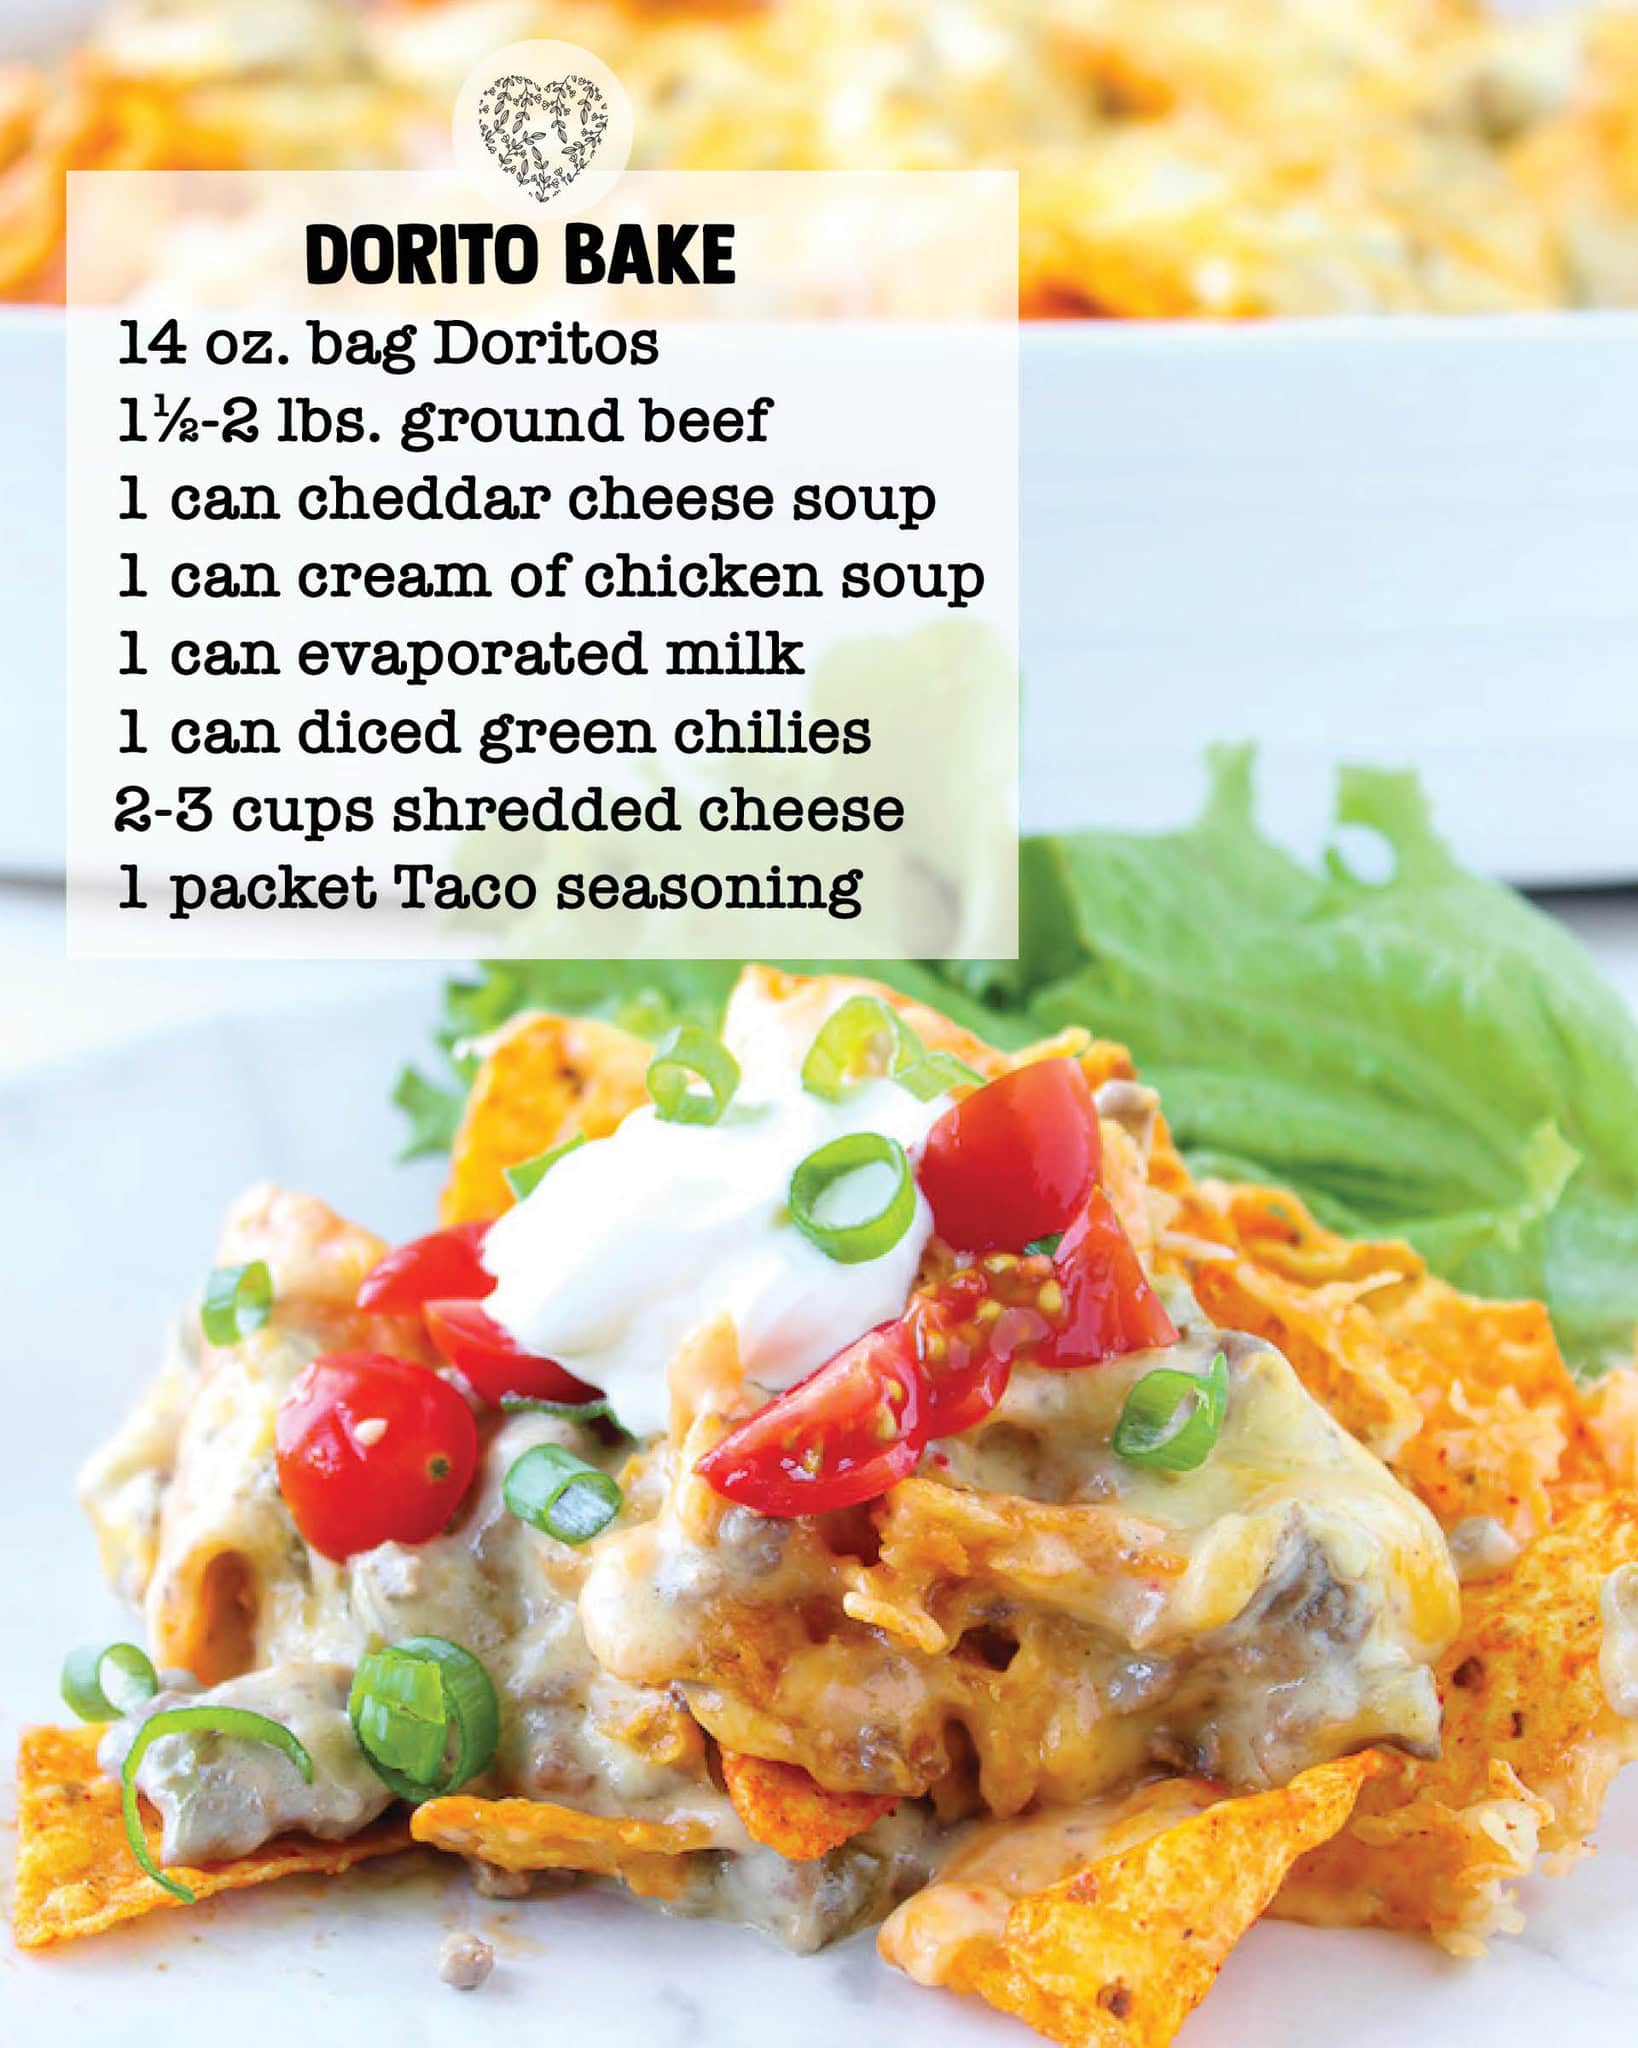 A plate of doritos casserole bake topped with sour cream and sliced green onions, catered to busy families, includes a list of ingredients such as cheddar cheese soup, ground beef, and taco seasoning visible